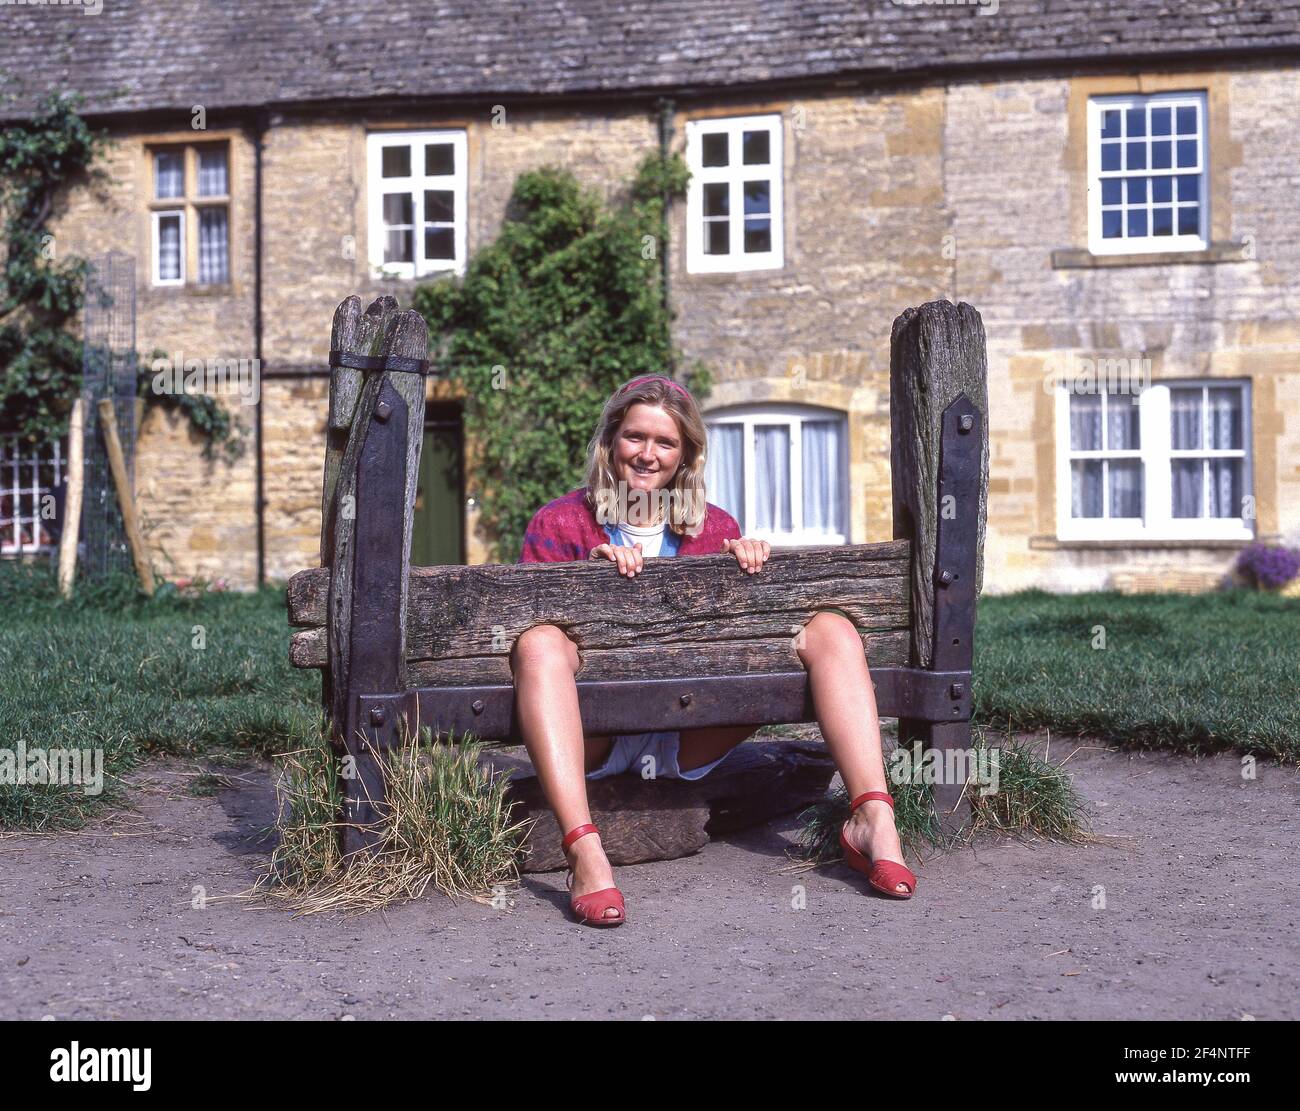 Young woman posing in village stocks, Market Square, Stow-on-the-Wold, Gloucestershire, England, United Kingdom Stock Photo